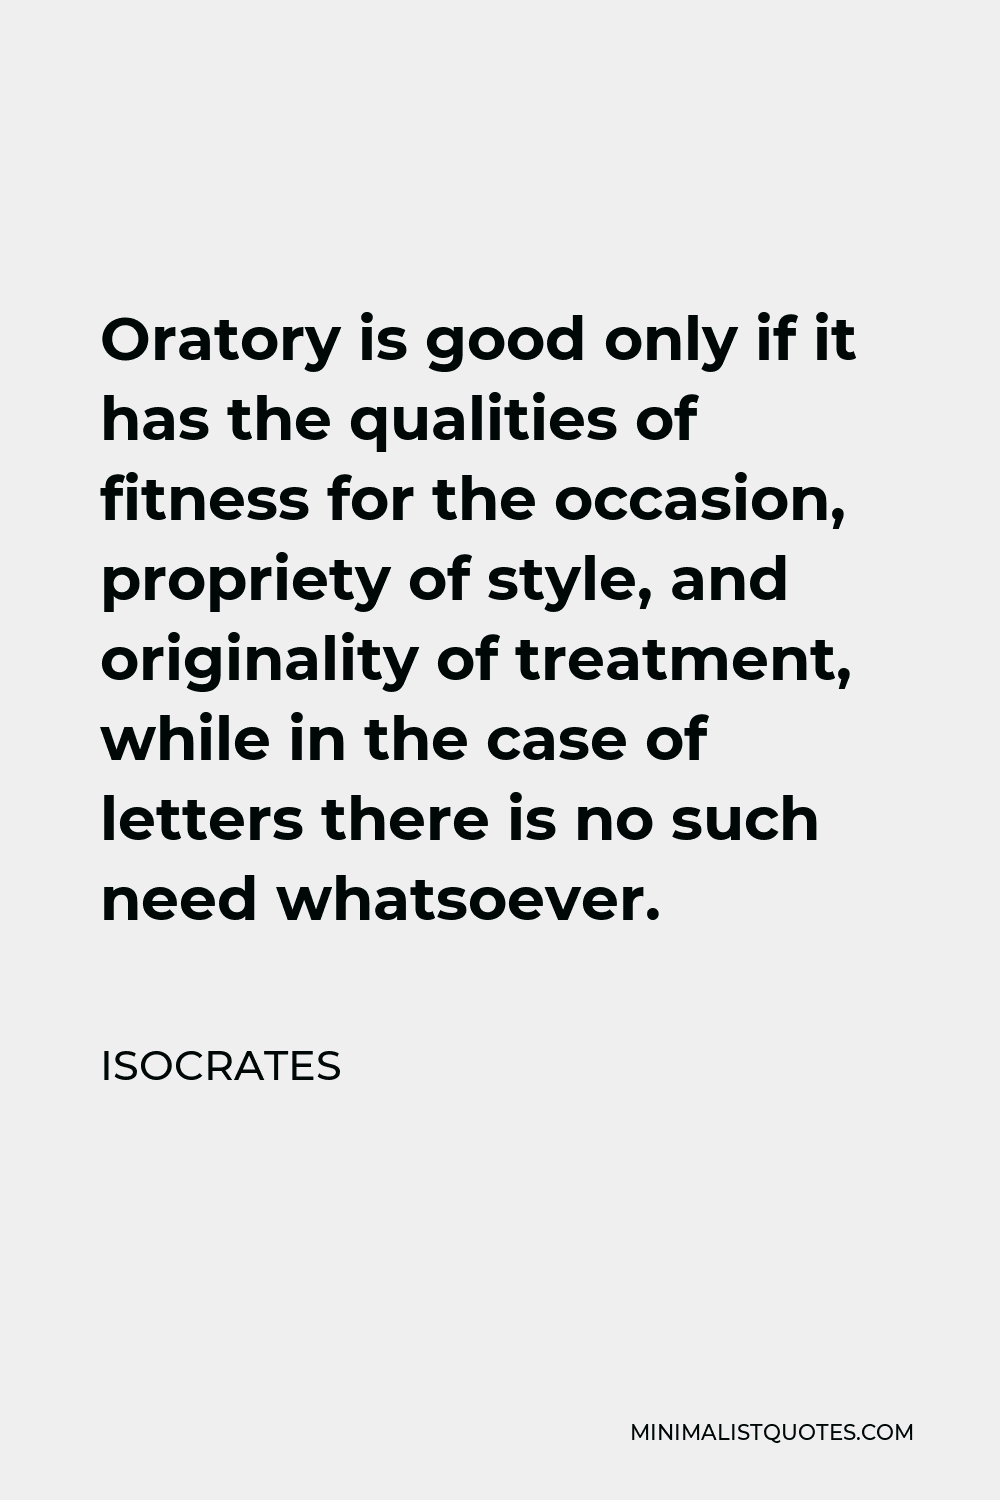 Isocrates Quote - Oratory is good only if it has the qualities of fitness for the occasion, propriety of style, and originality of treatment, while in the case of letters there is no such need whatsoever.